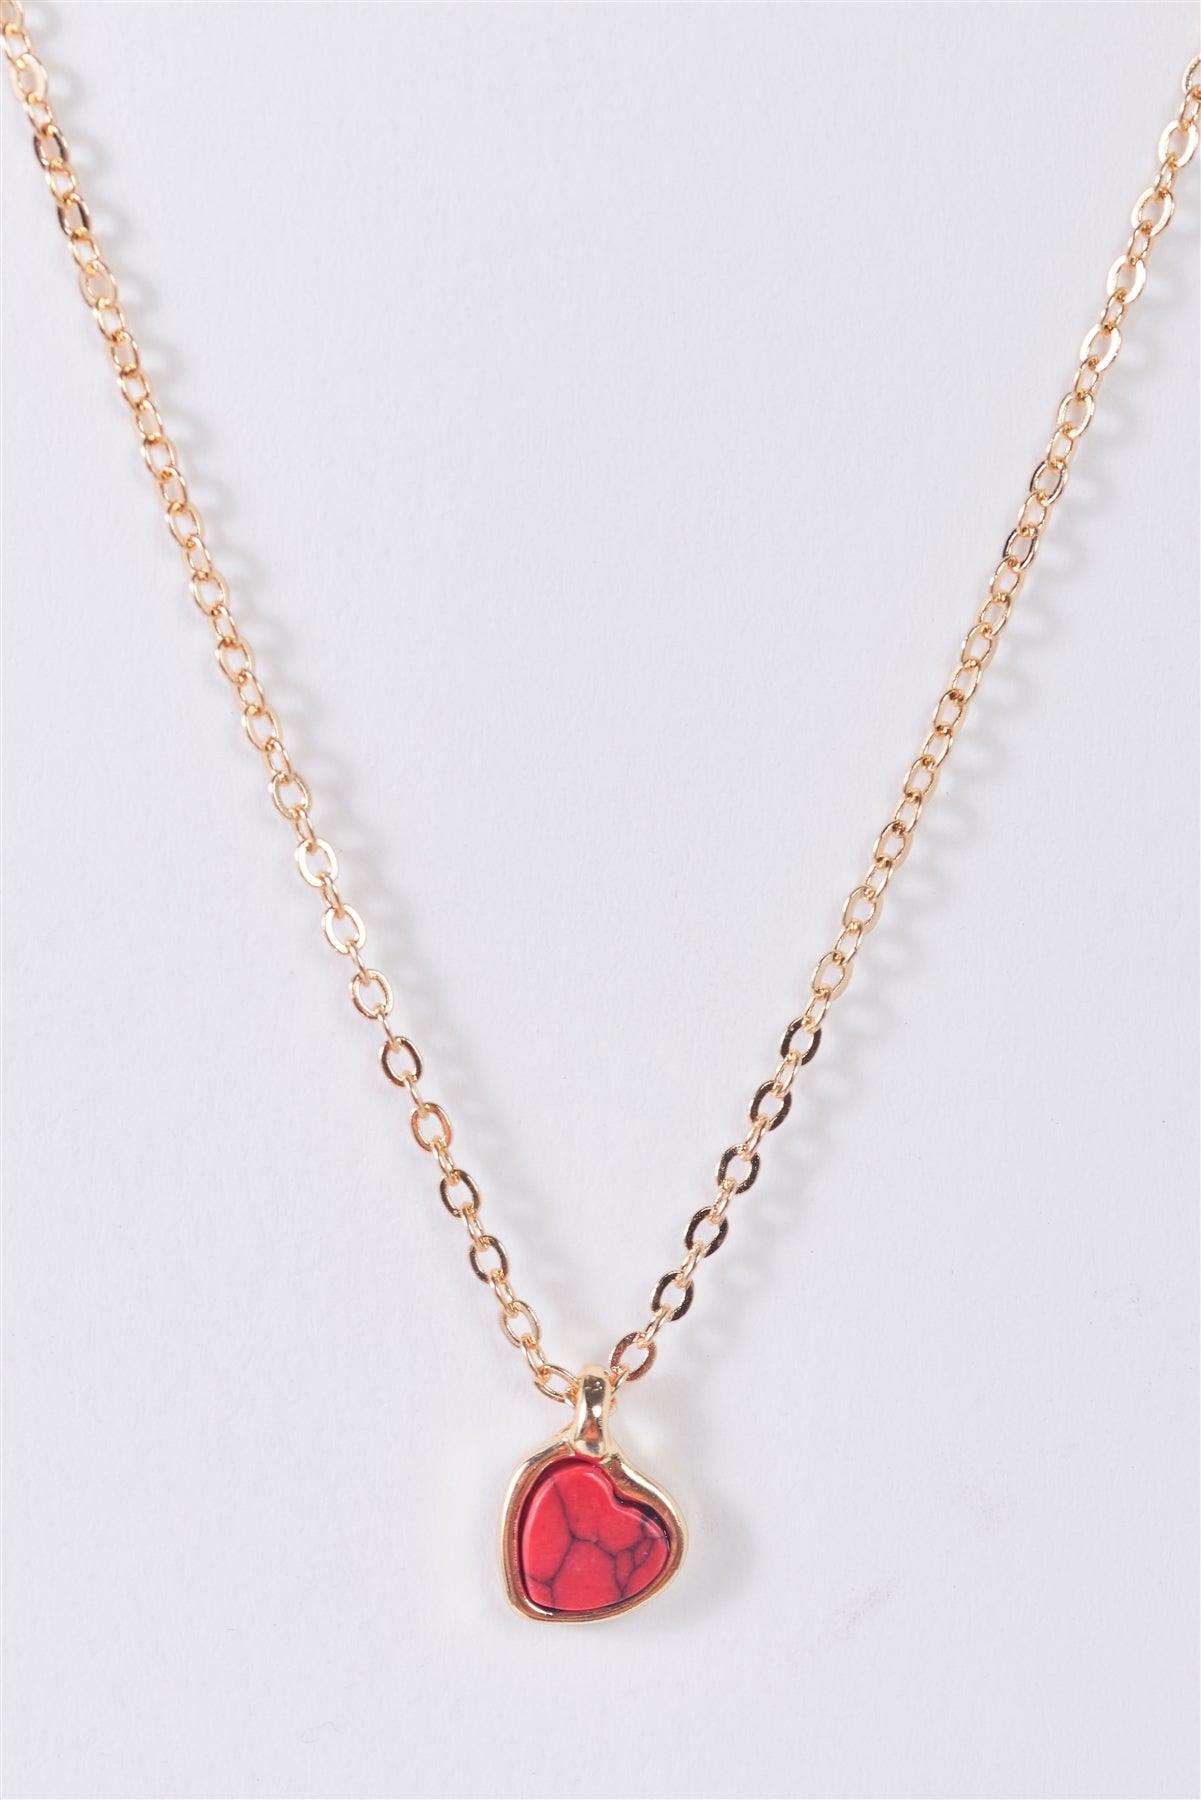 Gold Link Chain With Red Marble Heart Pendant Necklace /3 Pieces